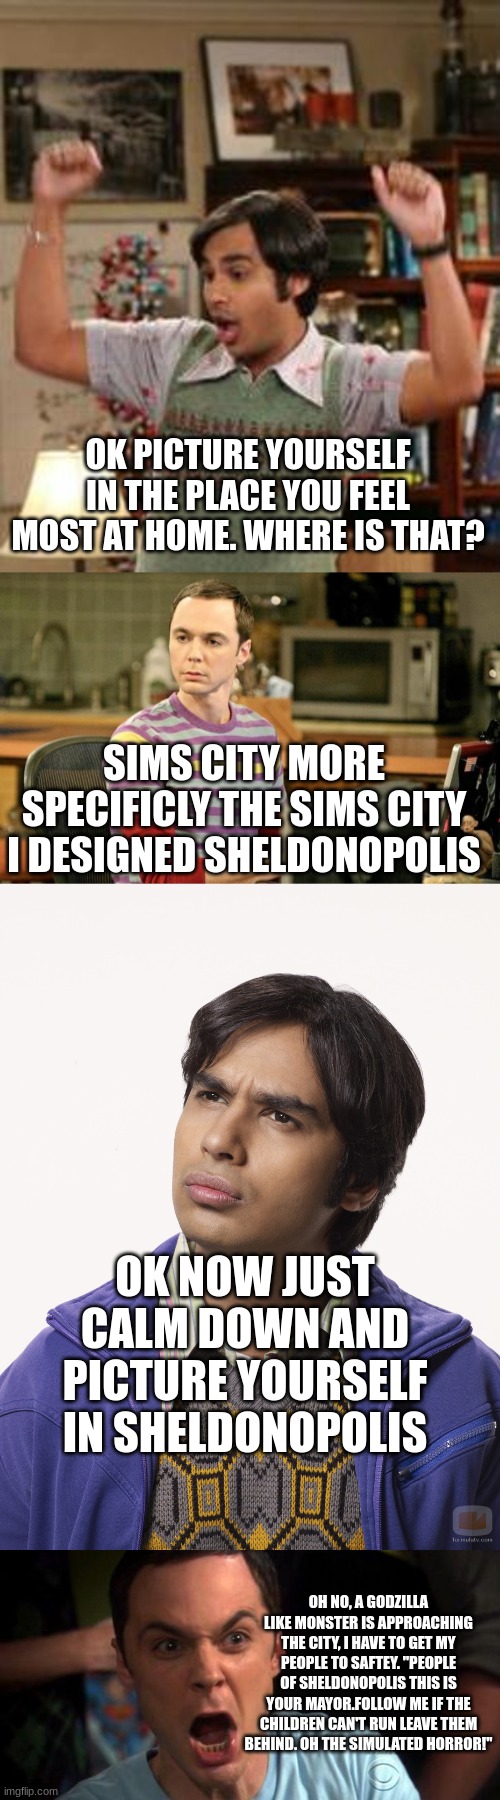 big bang theory meme | OK PICTURE YOURSELF IN THE PLACE YOU FEEL MOST AT HOME. WHERE IS THAT? SIMS CITY MORE SPECIFICLY THE SIMS CITY I DESIGNED SHELDONOPOLIS; OK NOW JUST CALM DOWN AND PICTURE YOURSELF IN SHELDONOPOLIS; OH NO, A GODZILLA LIKE MONSTER IS APPROACHING THE CITY, I HAVE TO GET MY PEOPLE TO SAFTEY. ''PEOPLE OF SHELDONOPOLIS THIS IS YOUR MAYOR.FOLLOW ME IF THE CHILDREN CAN'T RUN LEAVE THEM BEHIND. OH THE SIMULATED HORROR!'' | image tagged in rajesh koothrappali,sheldon big bang theory,raj big bang,sheldon cooper,the big bang theory,funny memes | made w/ Imgflip meme maker